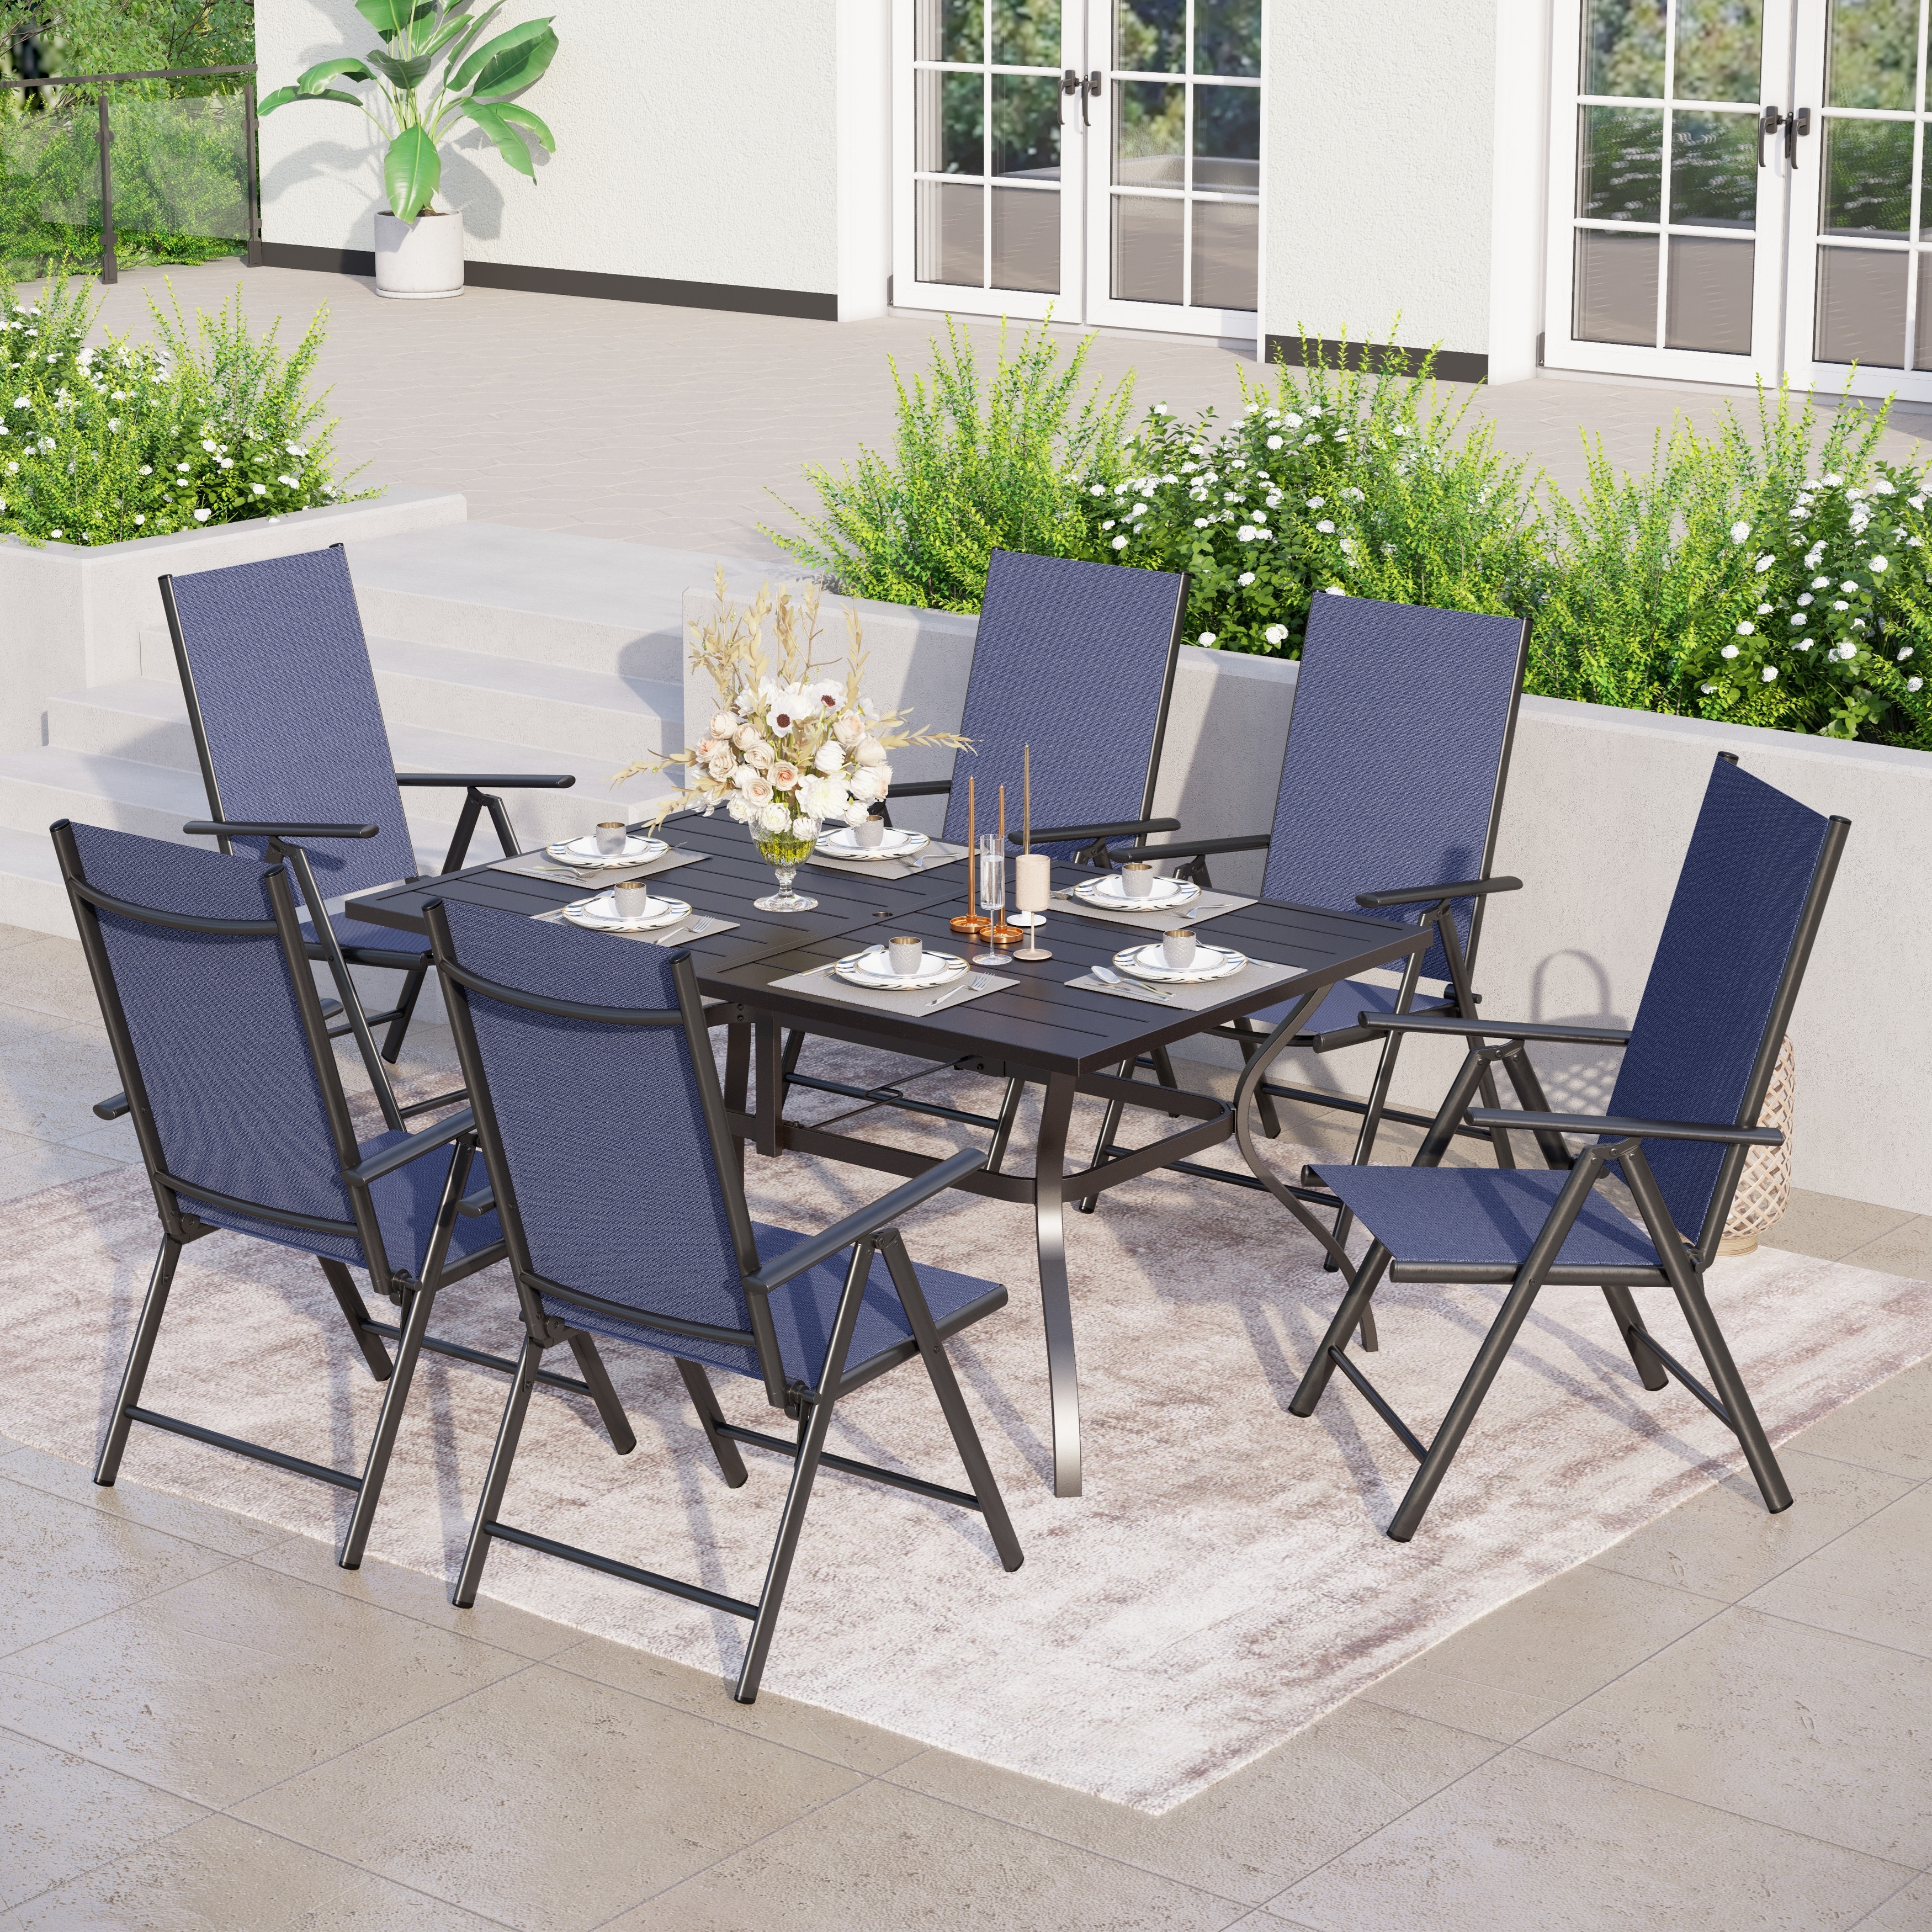 Mfstudio 7 Pieces Dining Set  6 X Reclining Folding Sling Dining Chairs And 1 X Table With An Umbrella Hole